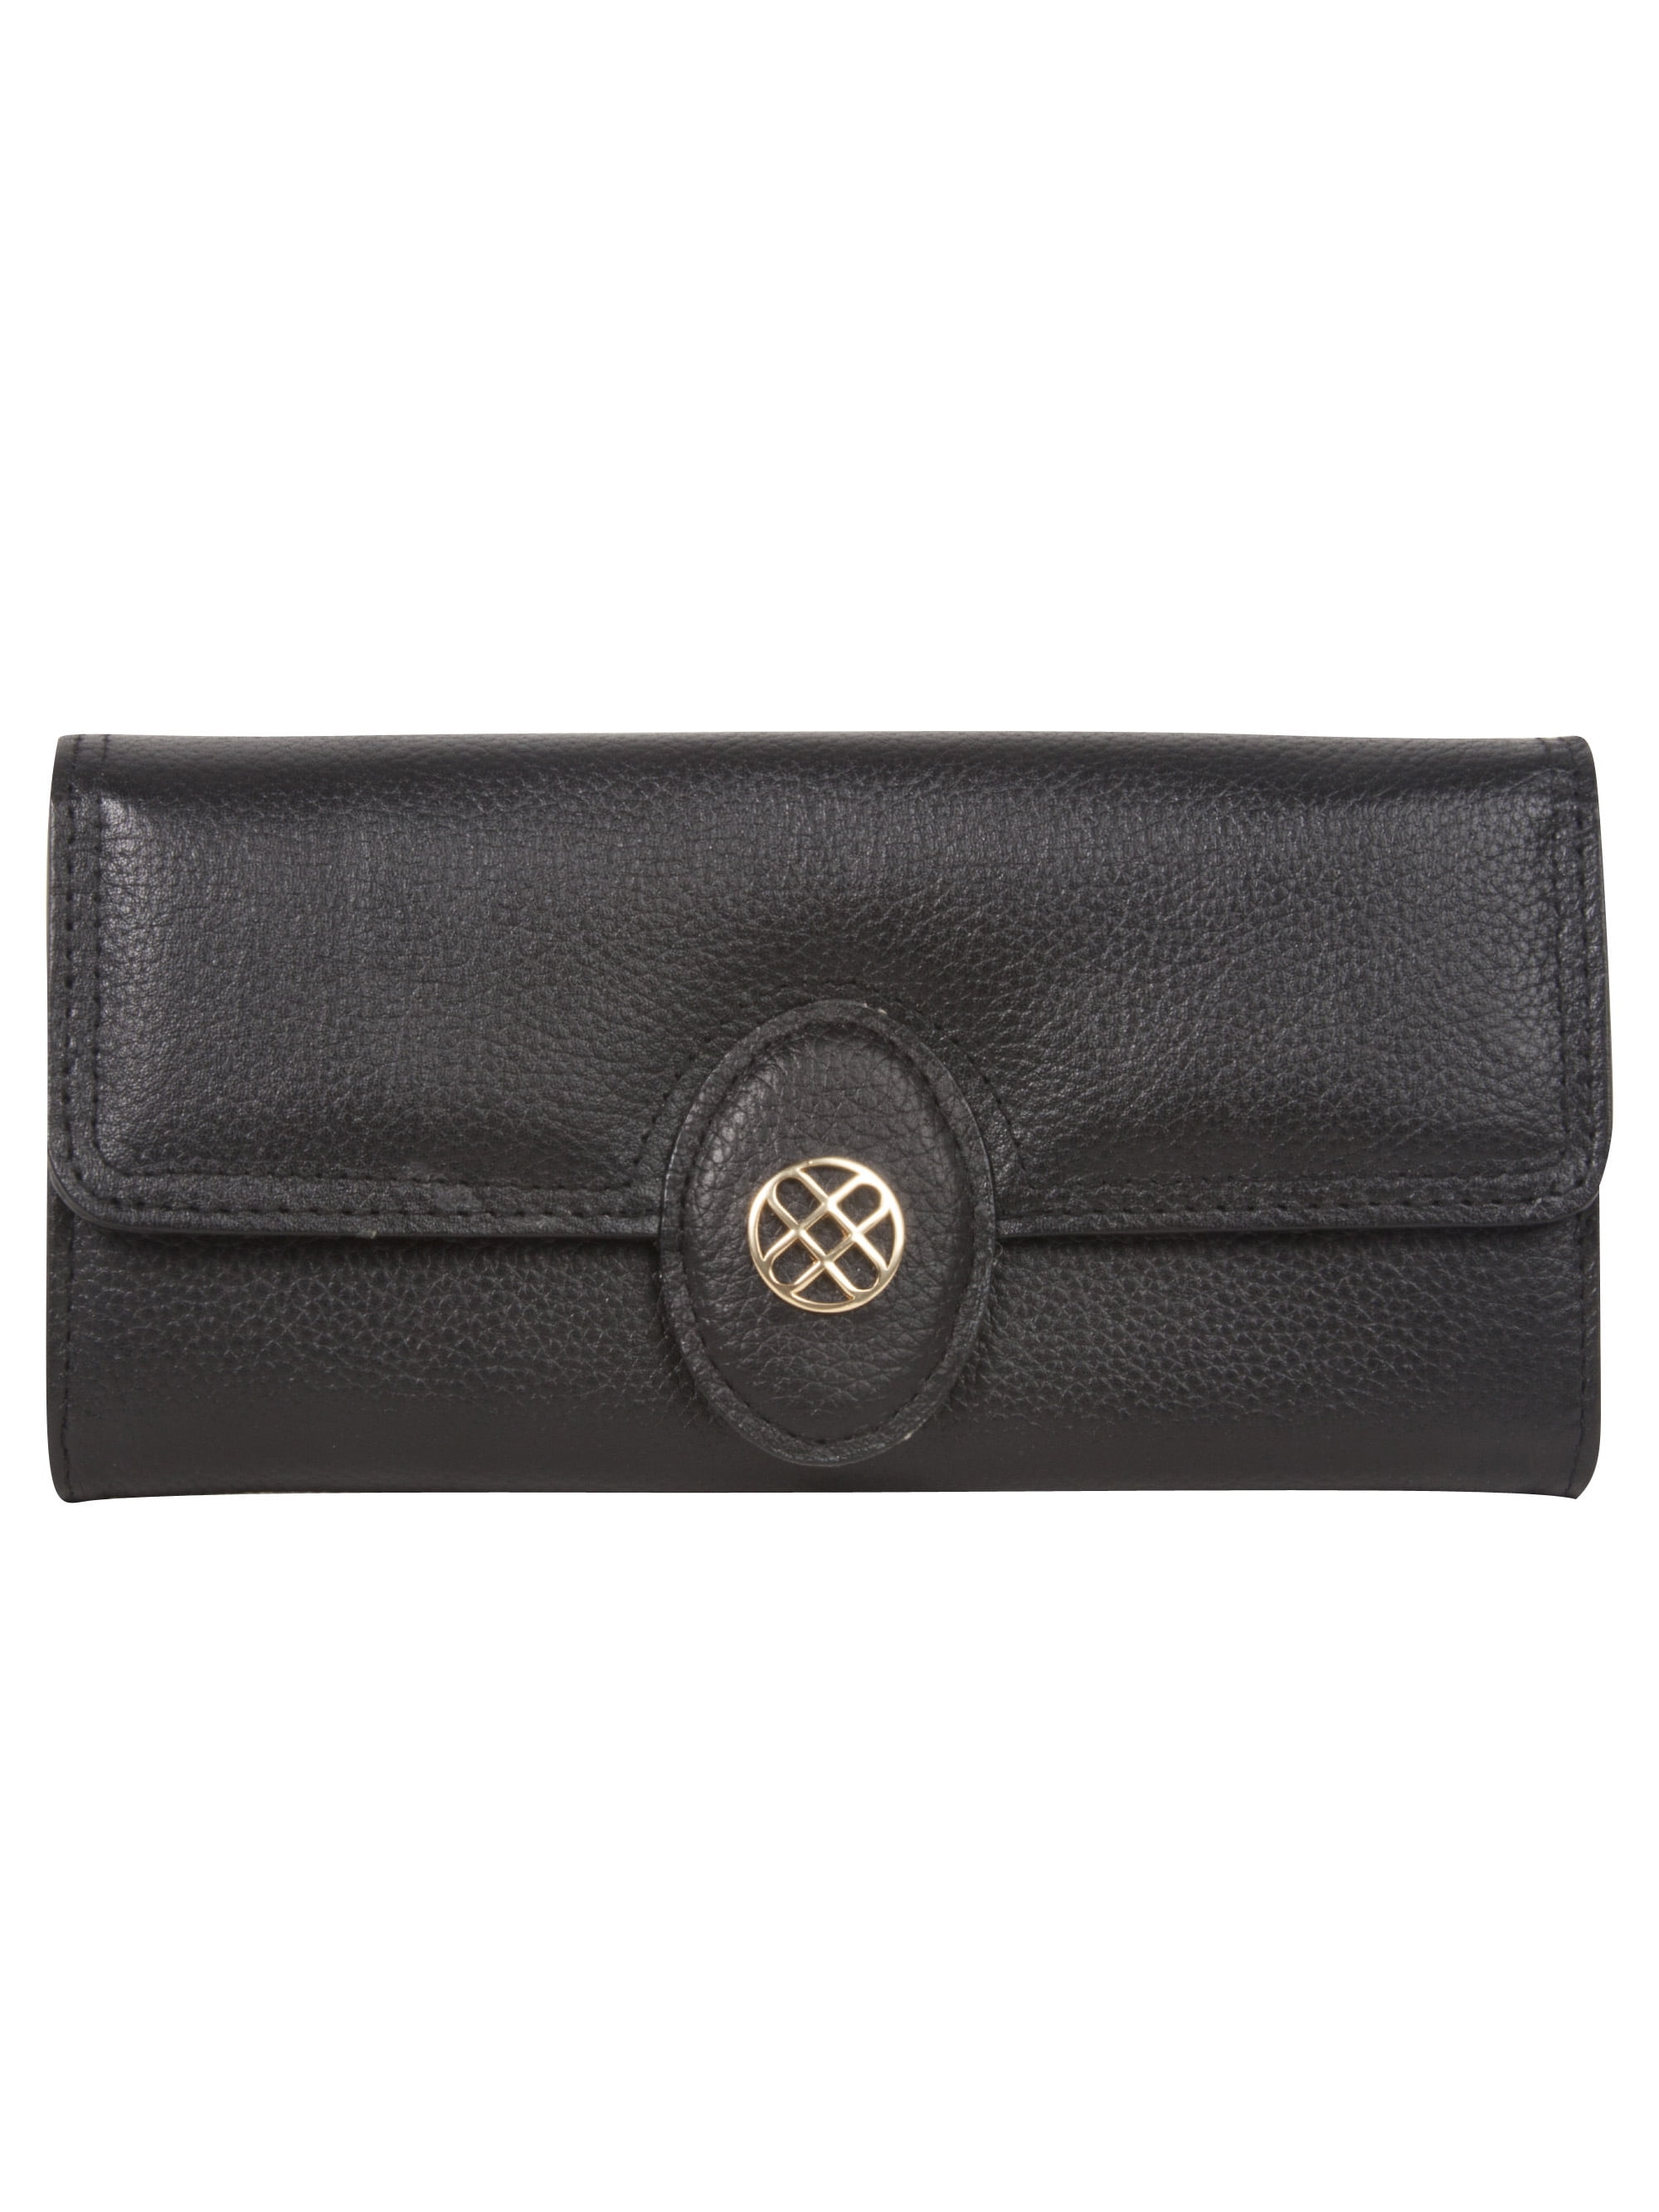 Buxton Black Wallets For Women For Sale | IUCN Water